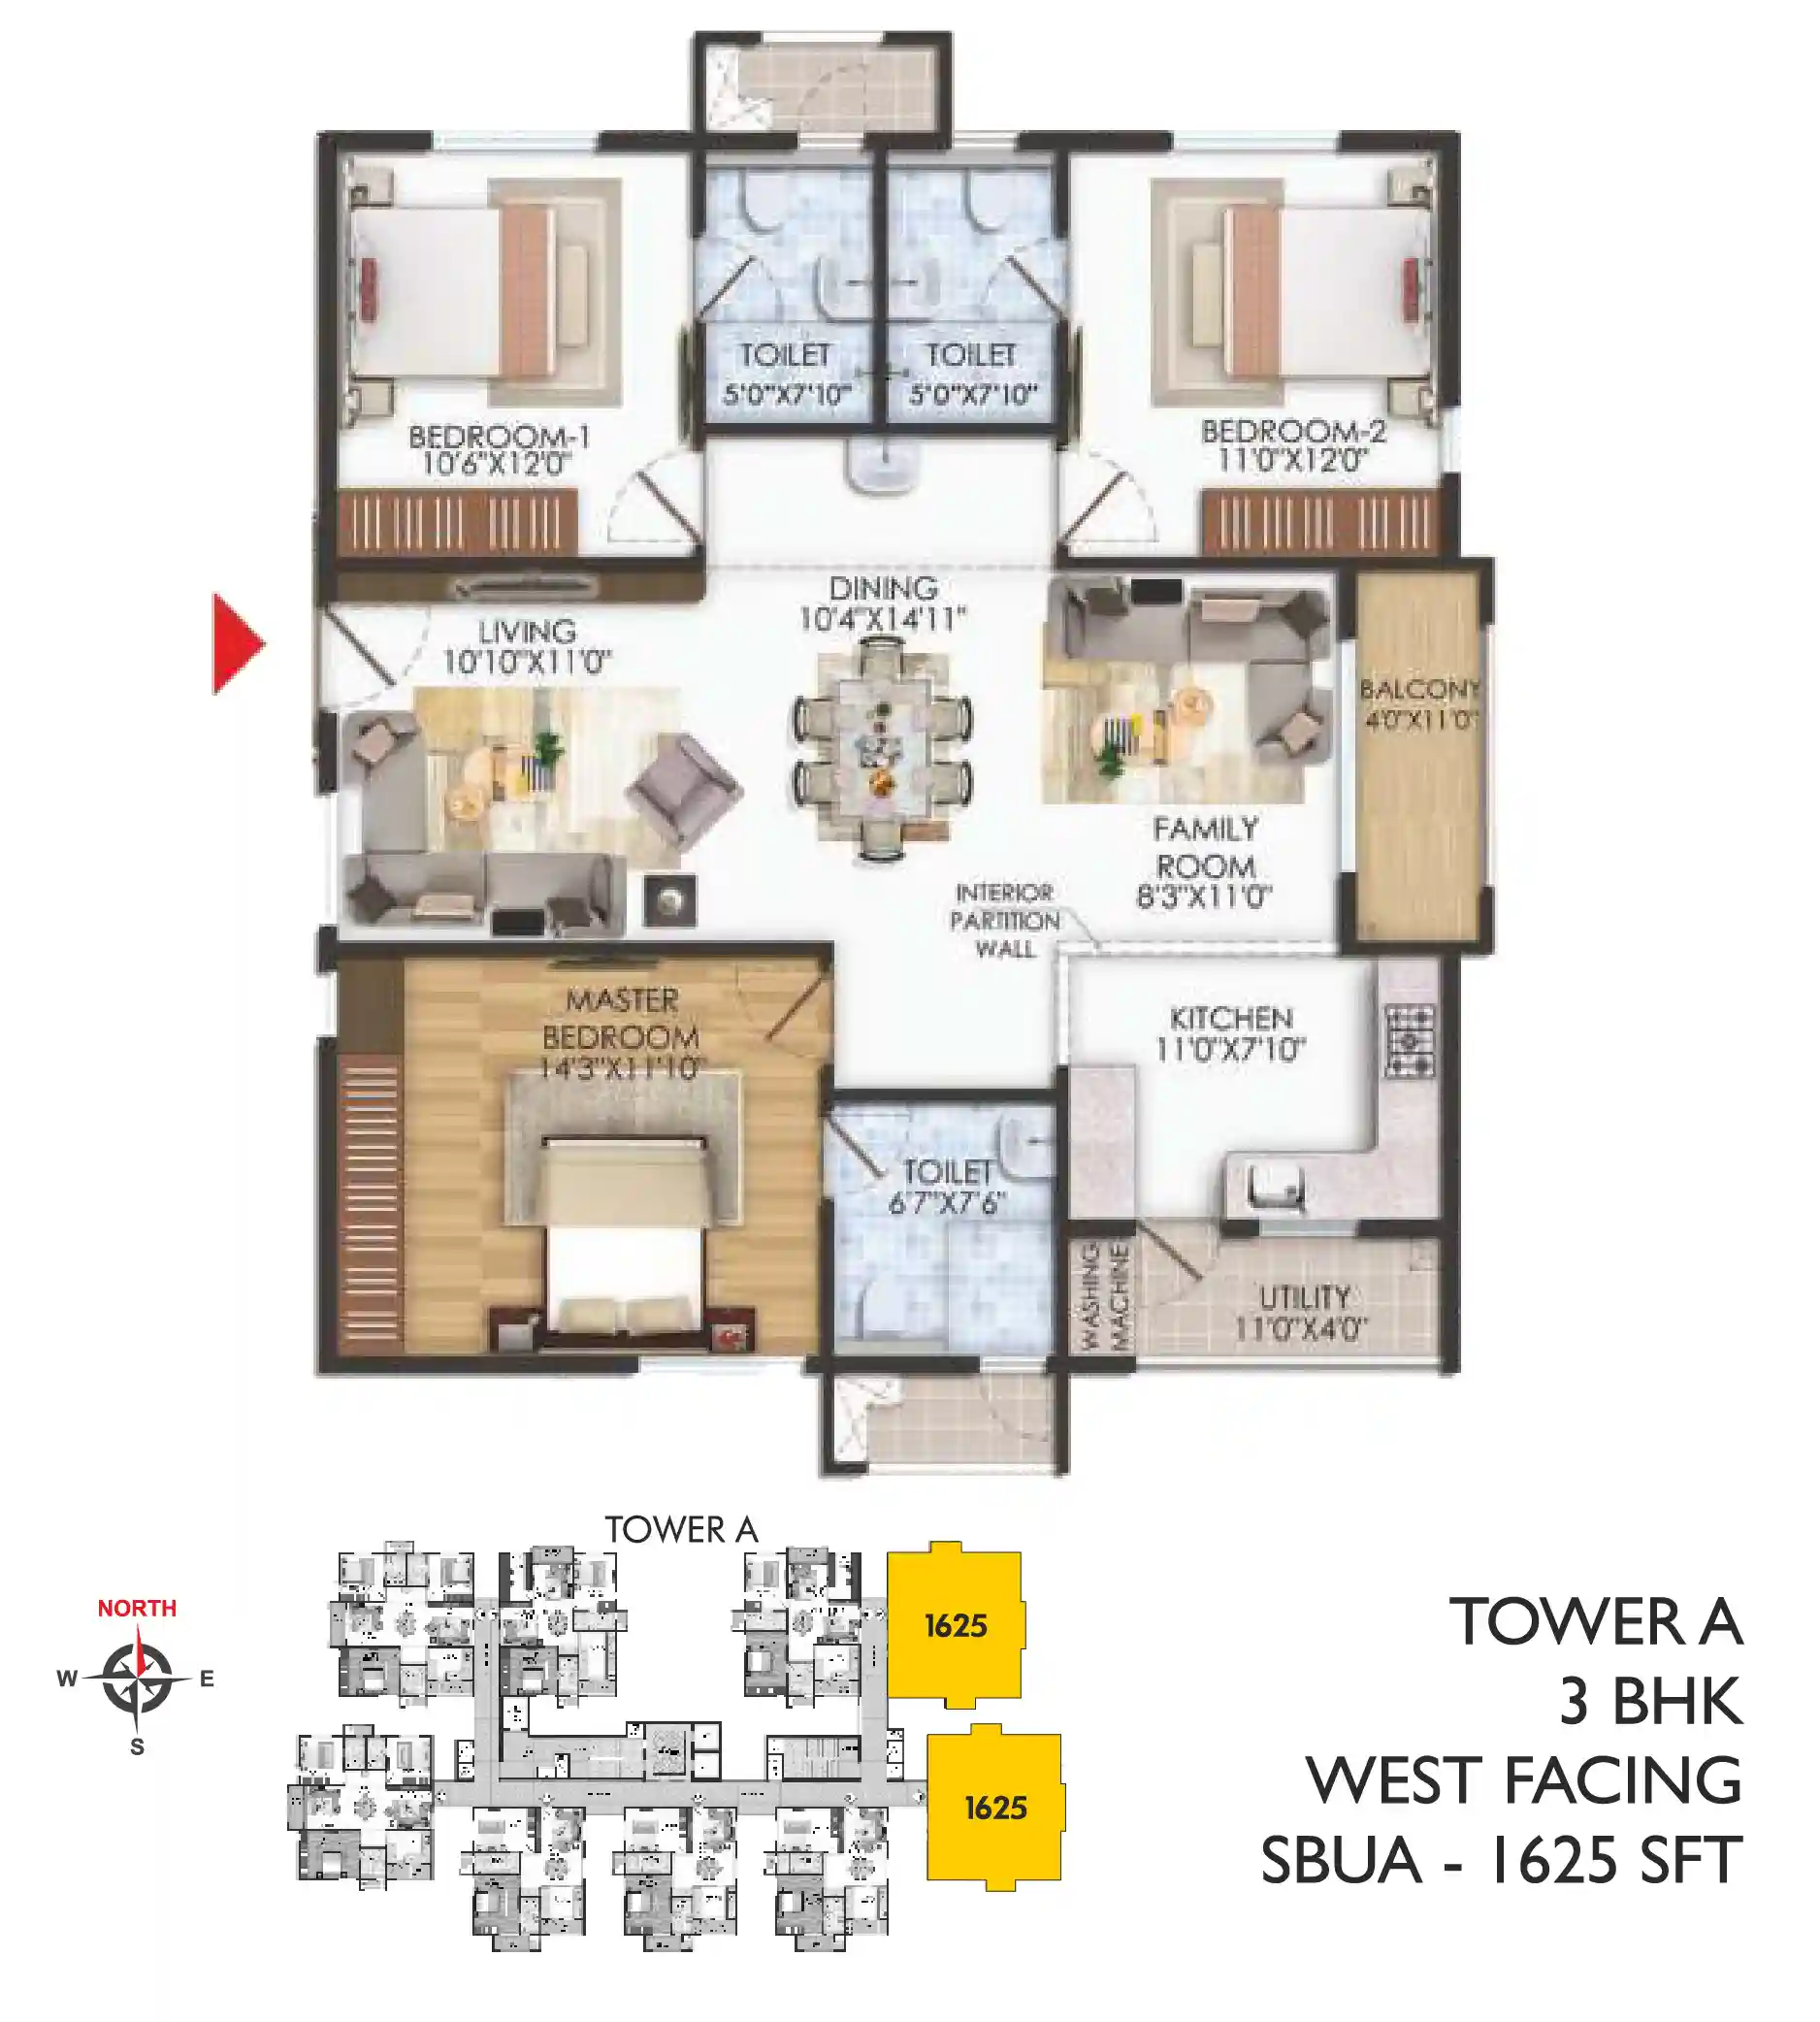 Tower - A _SBUA 1625_WEST FACING(3 BHK)